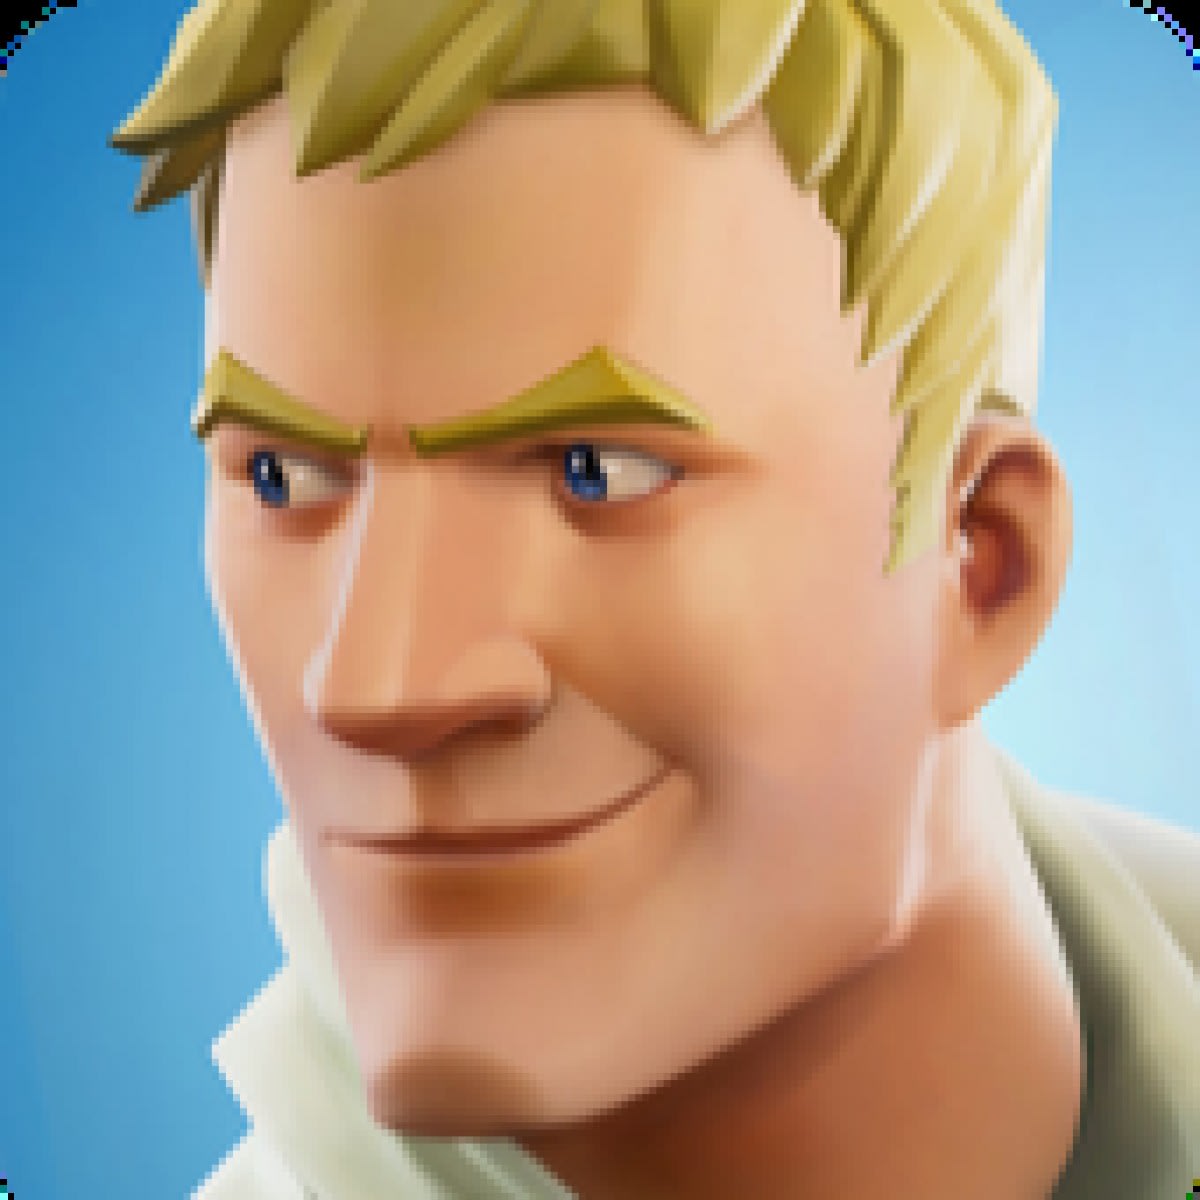 Fortnite Mobile Android APK Latest Version Free Download